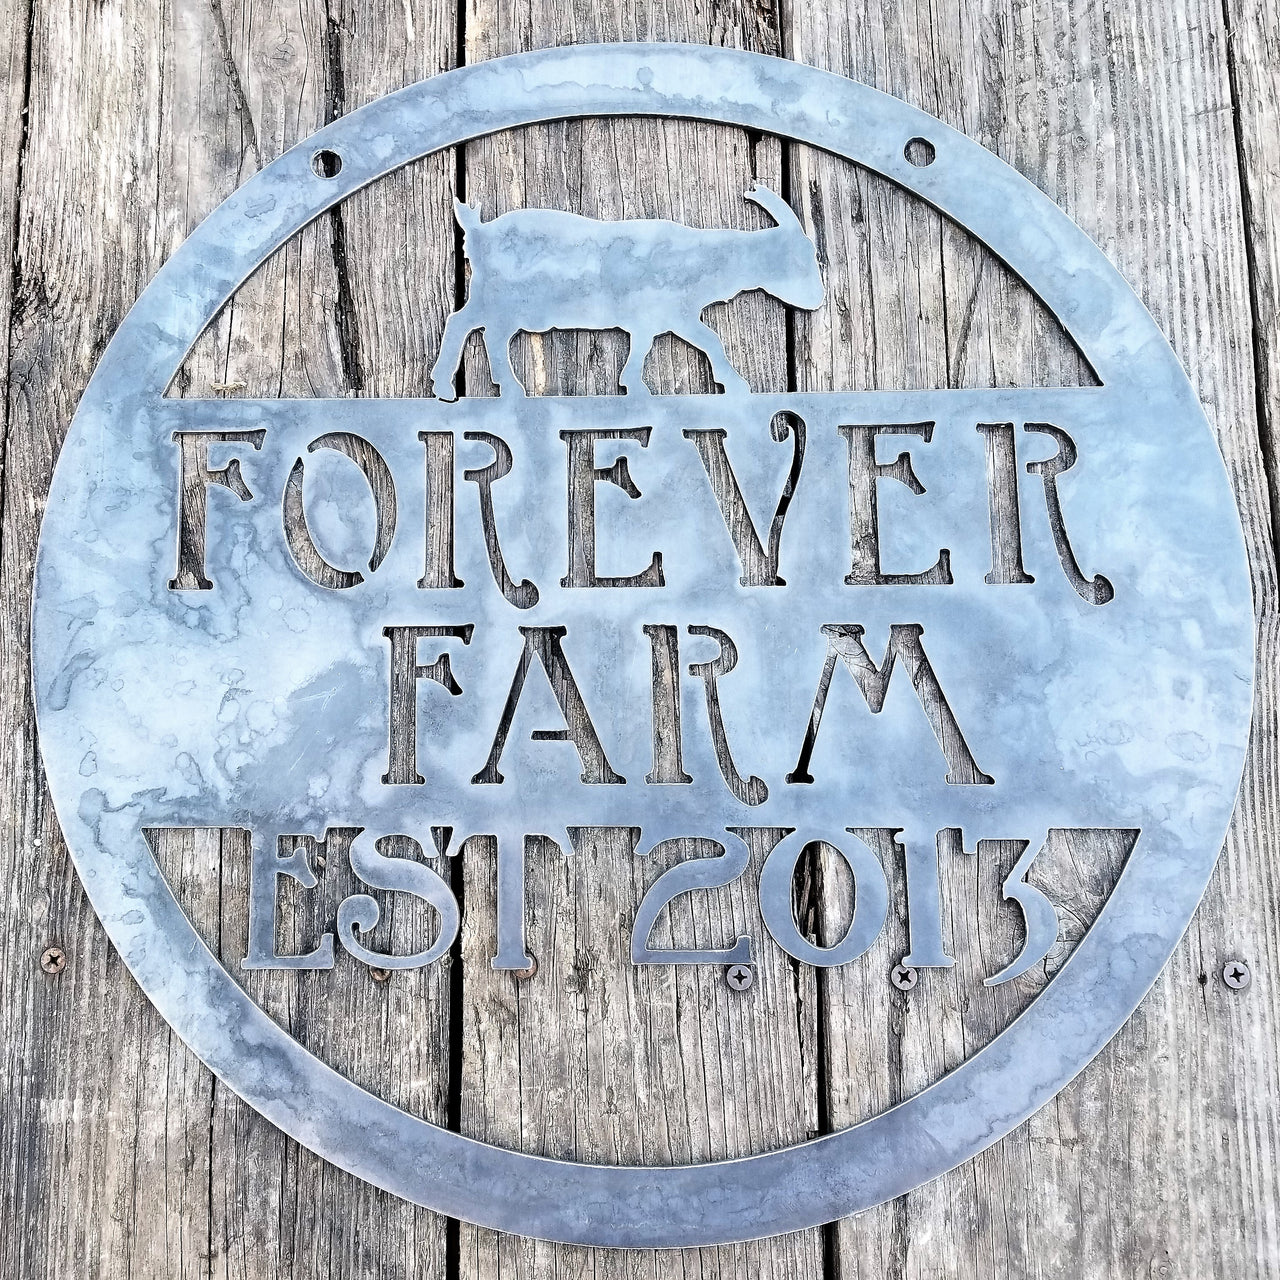 This is a custom round metal sign that features a goat and reads from the top down, "Forever Farm Est. 2013"